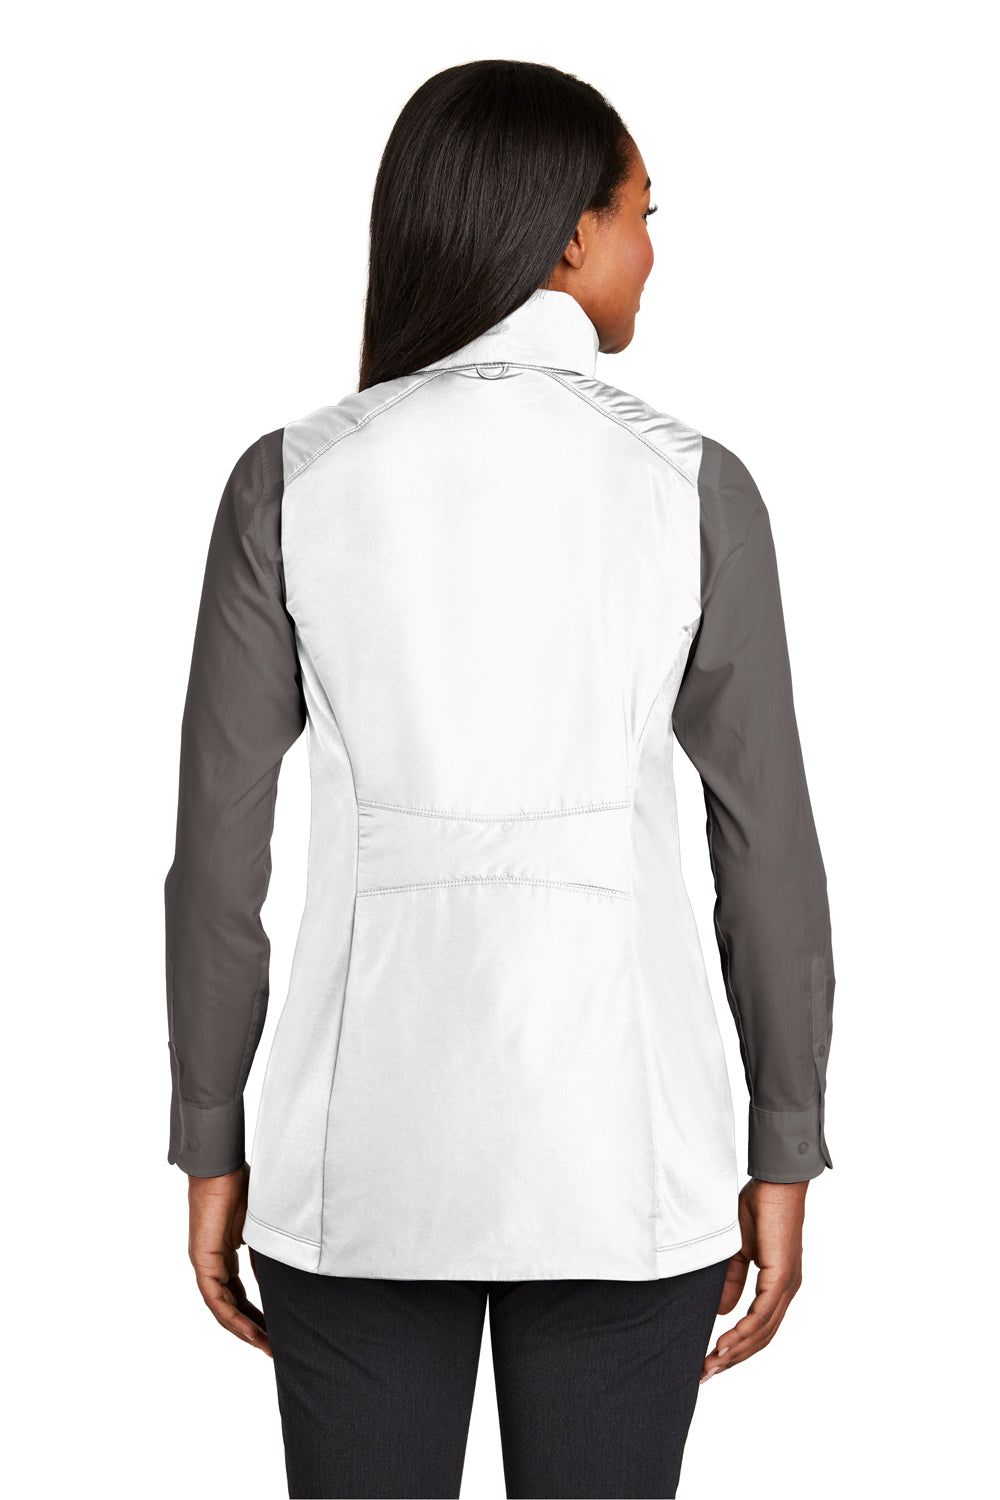 Port Authority L903 Womens Collective Wind & Water Resistant Full Zip Vest White Back